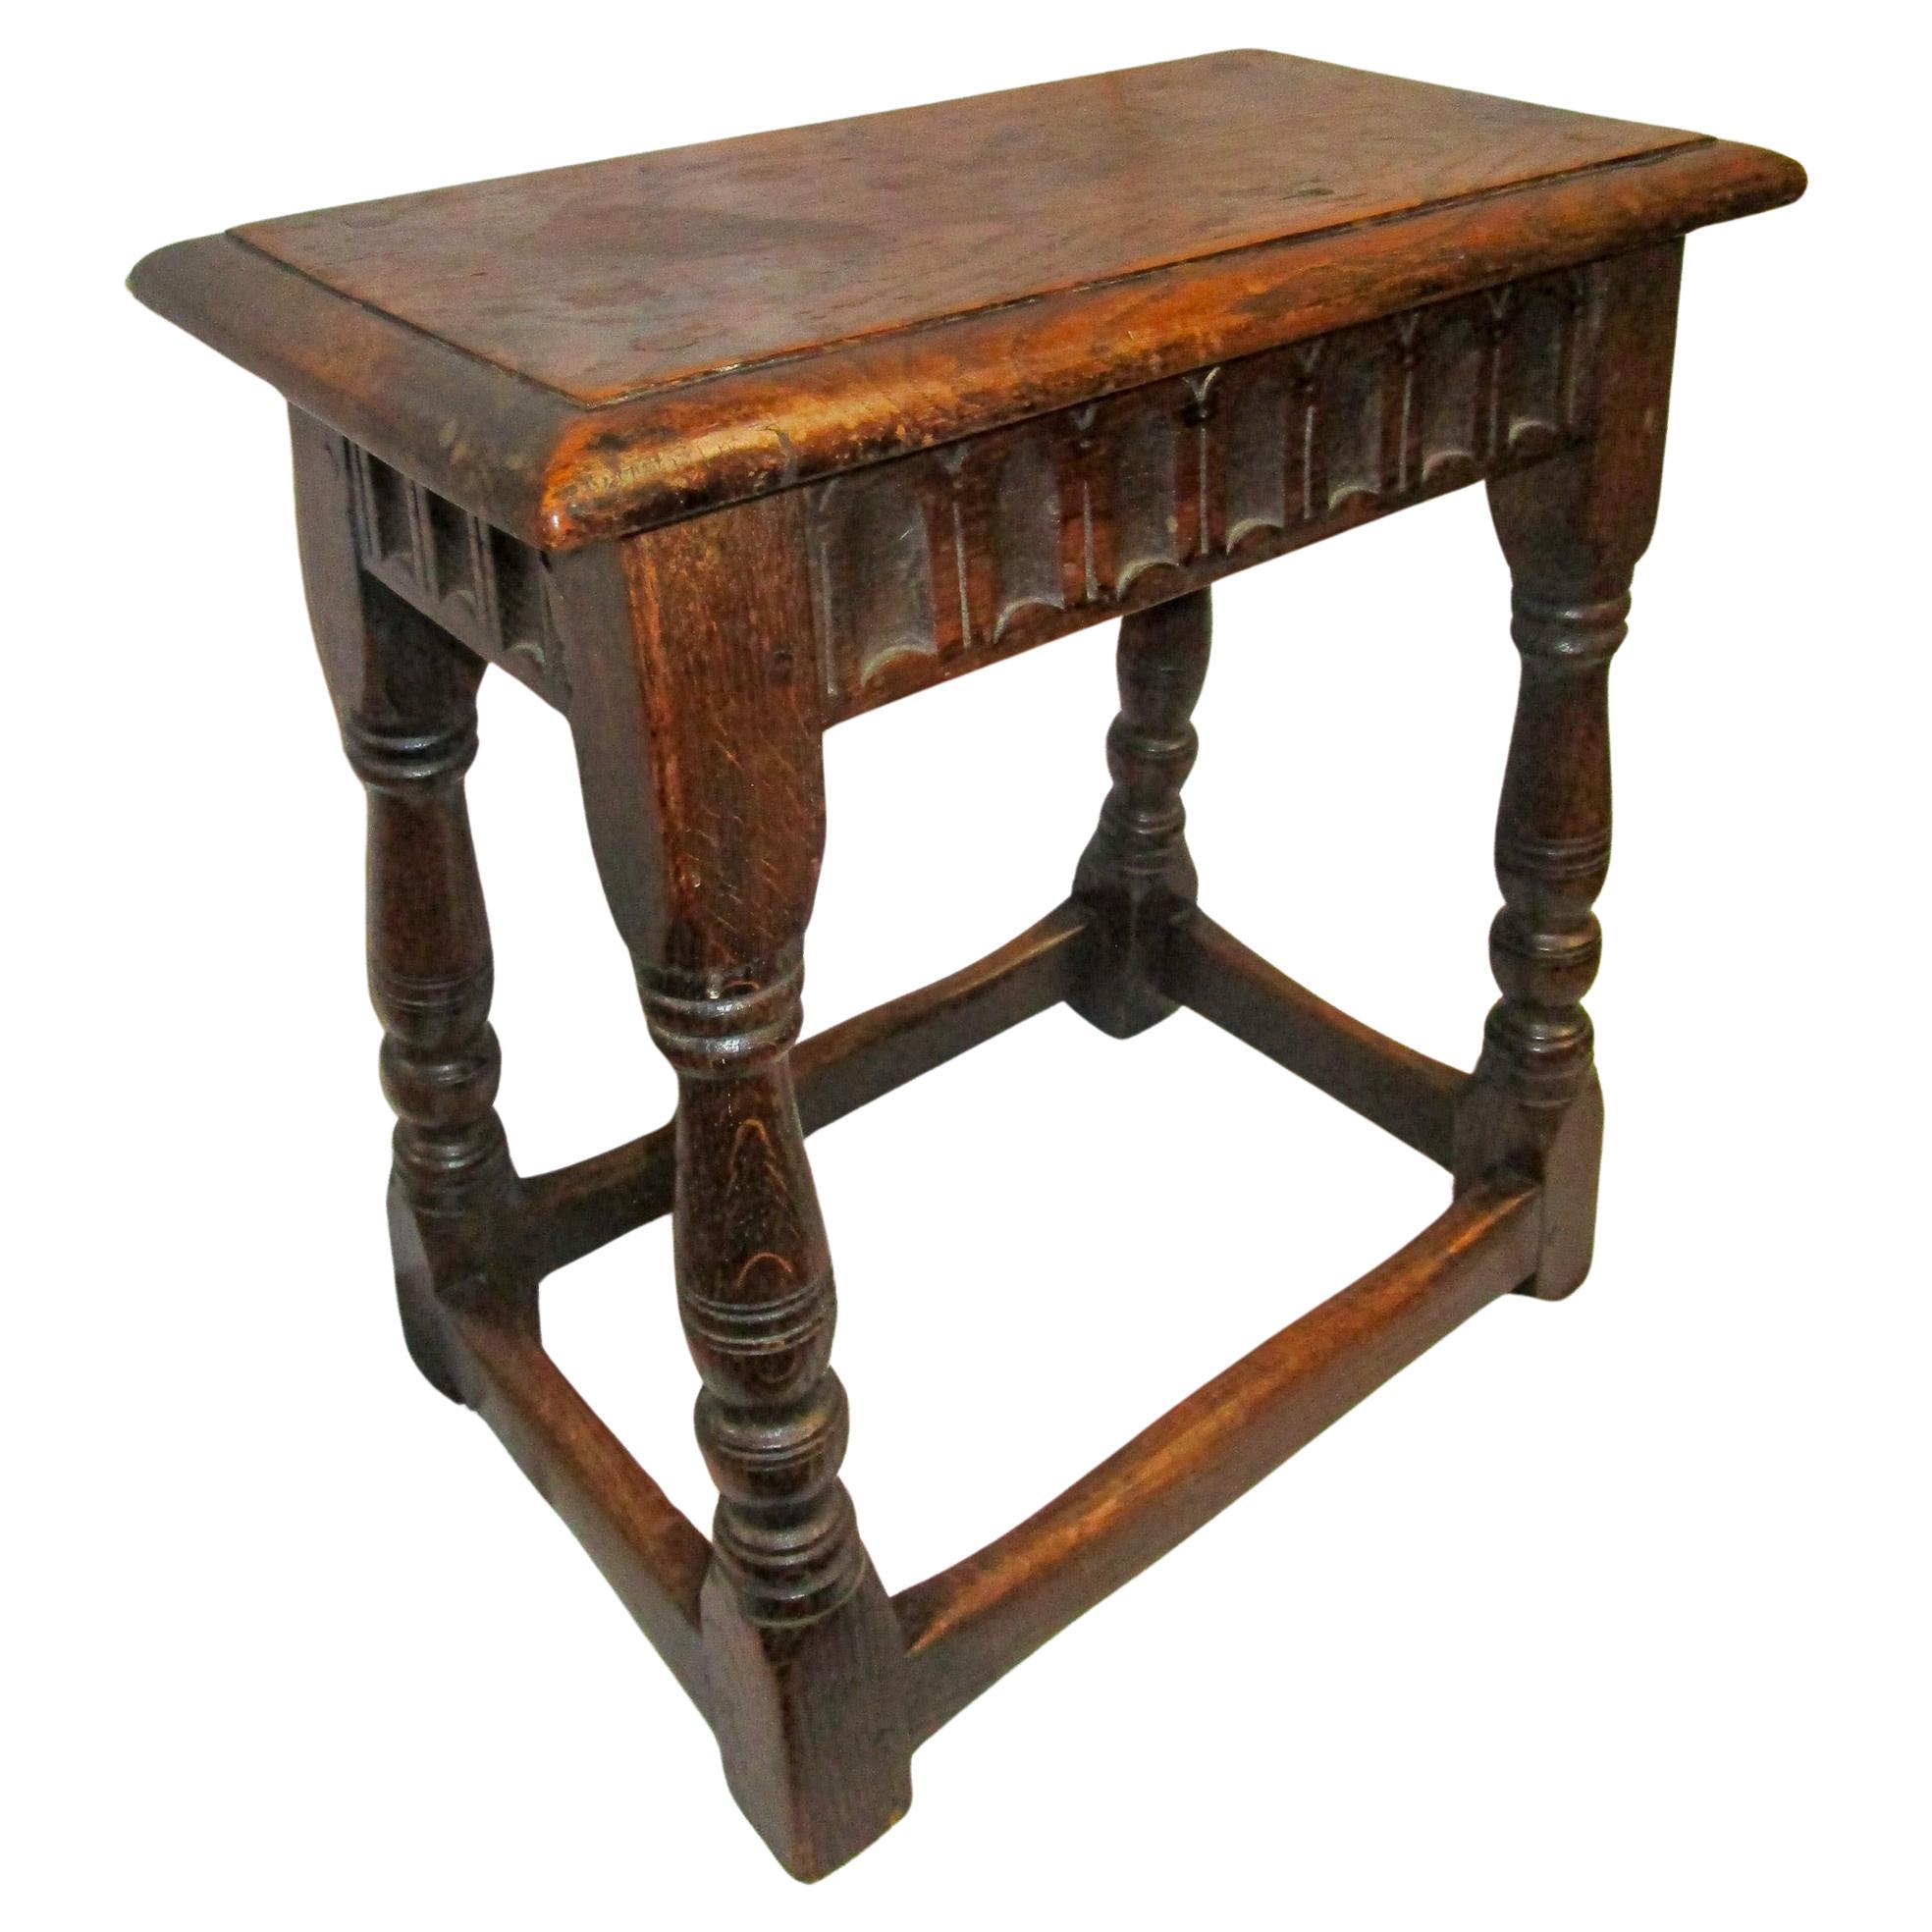 Early 18thc English Carved Oak Joint Stool with Pegged Construction For Sale